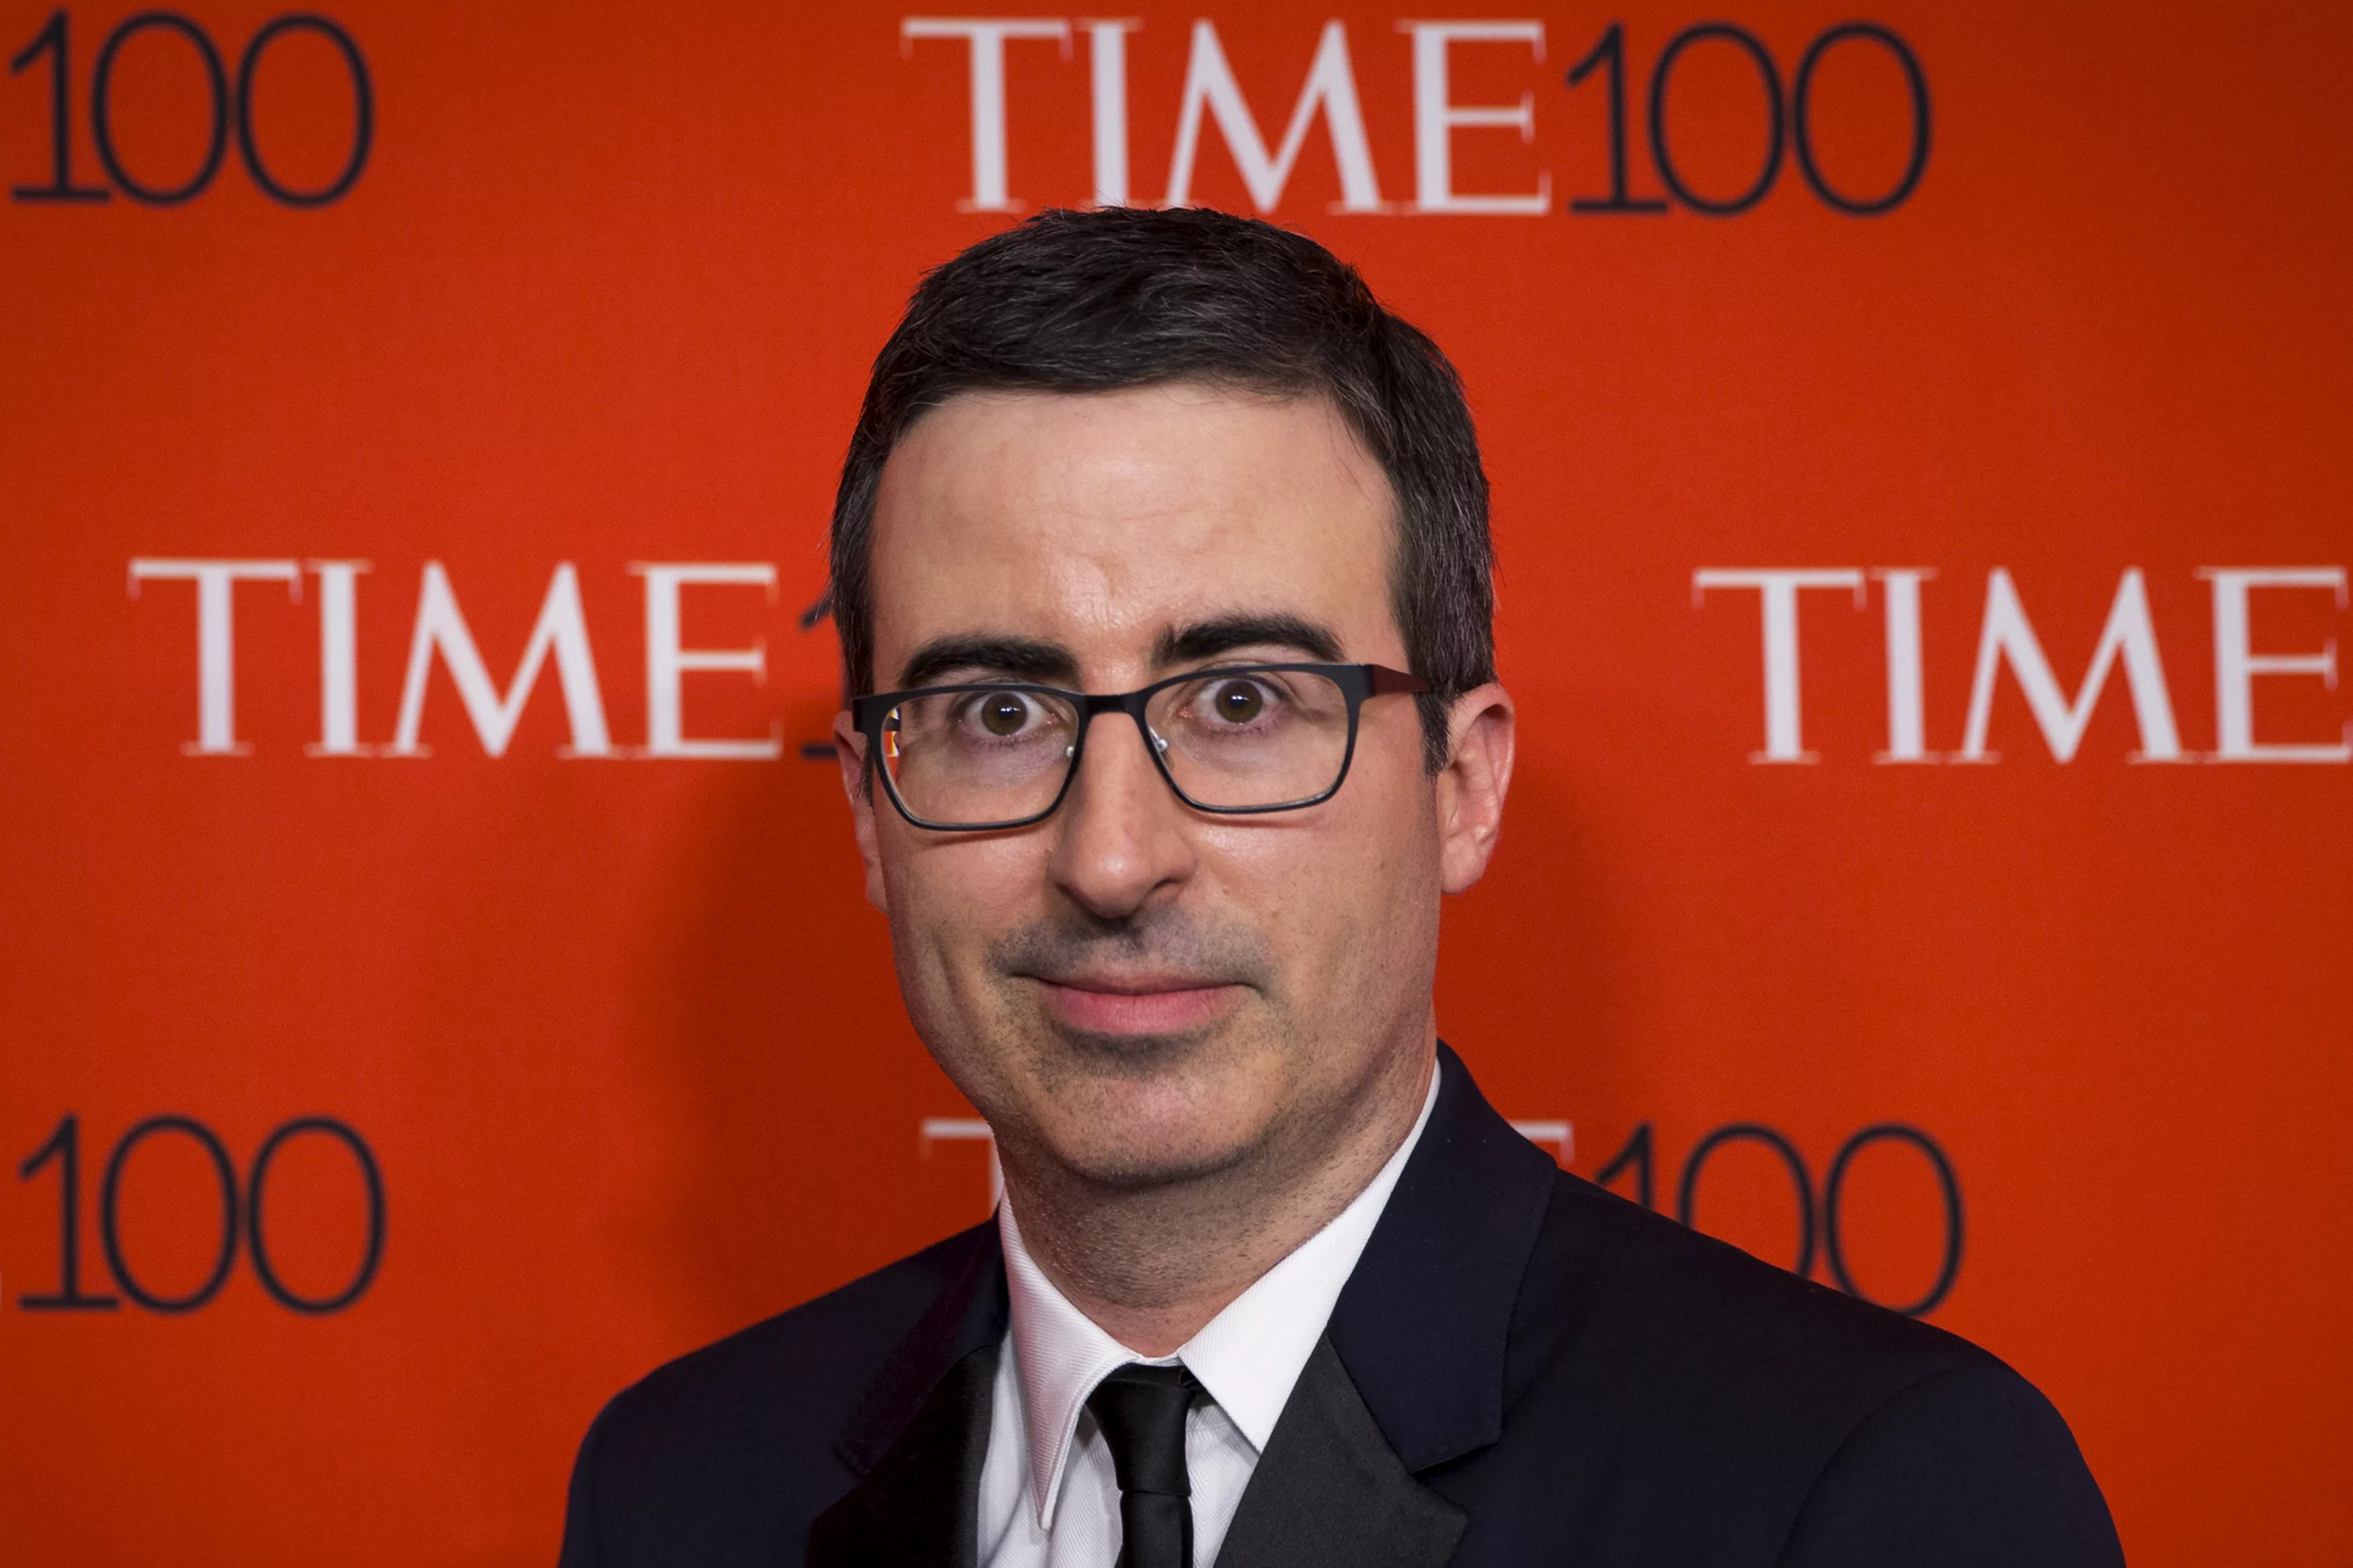 television-host-john-oliver-arrives-for-the-time-100-gala-in-new-york